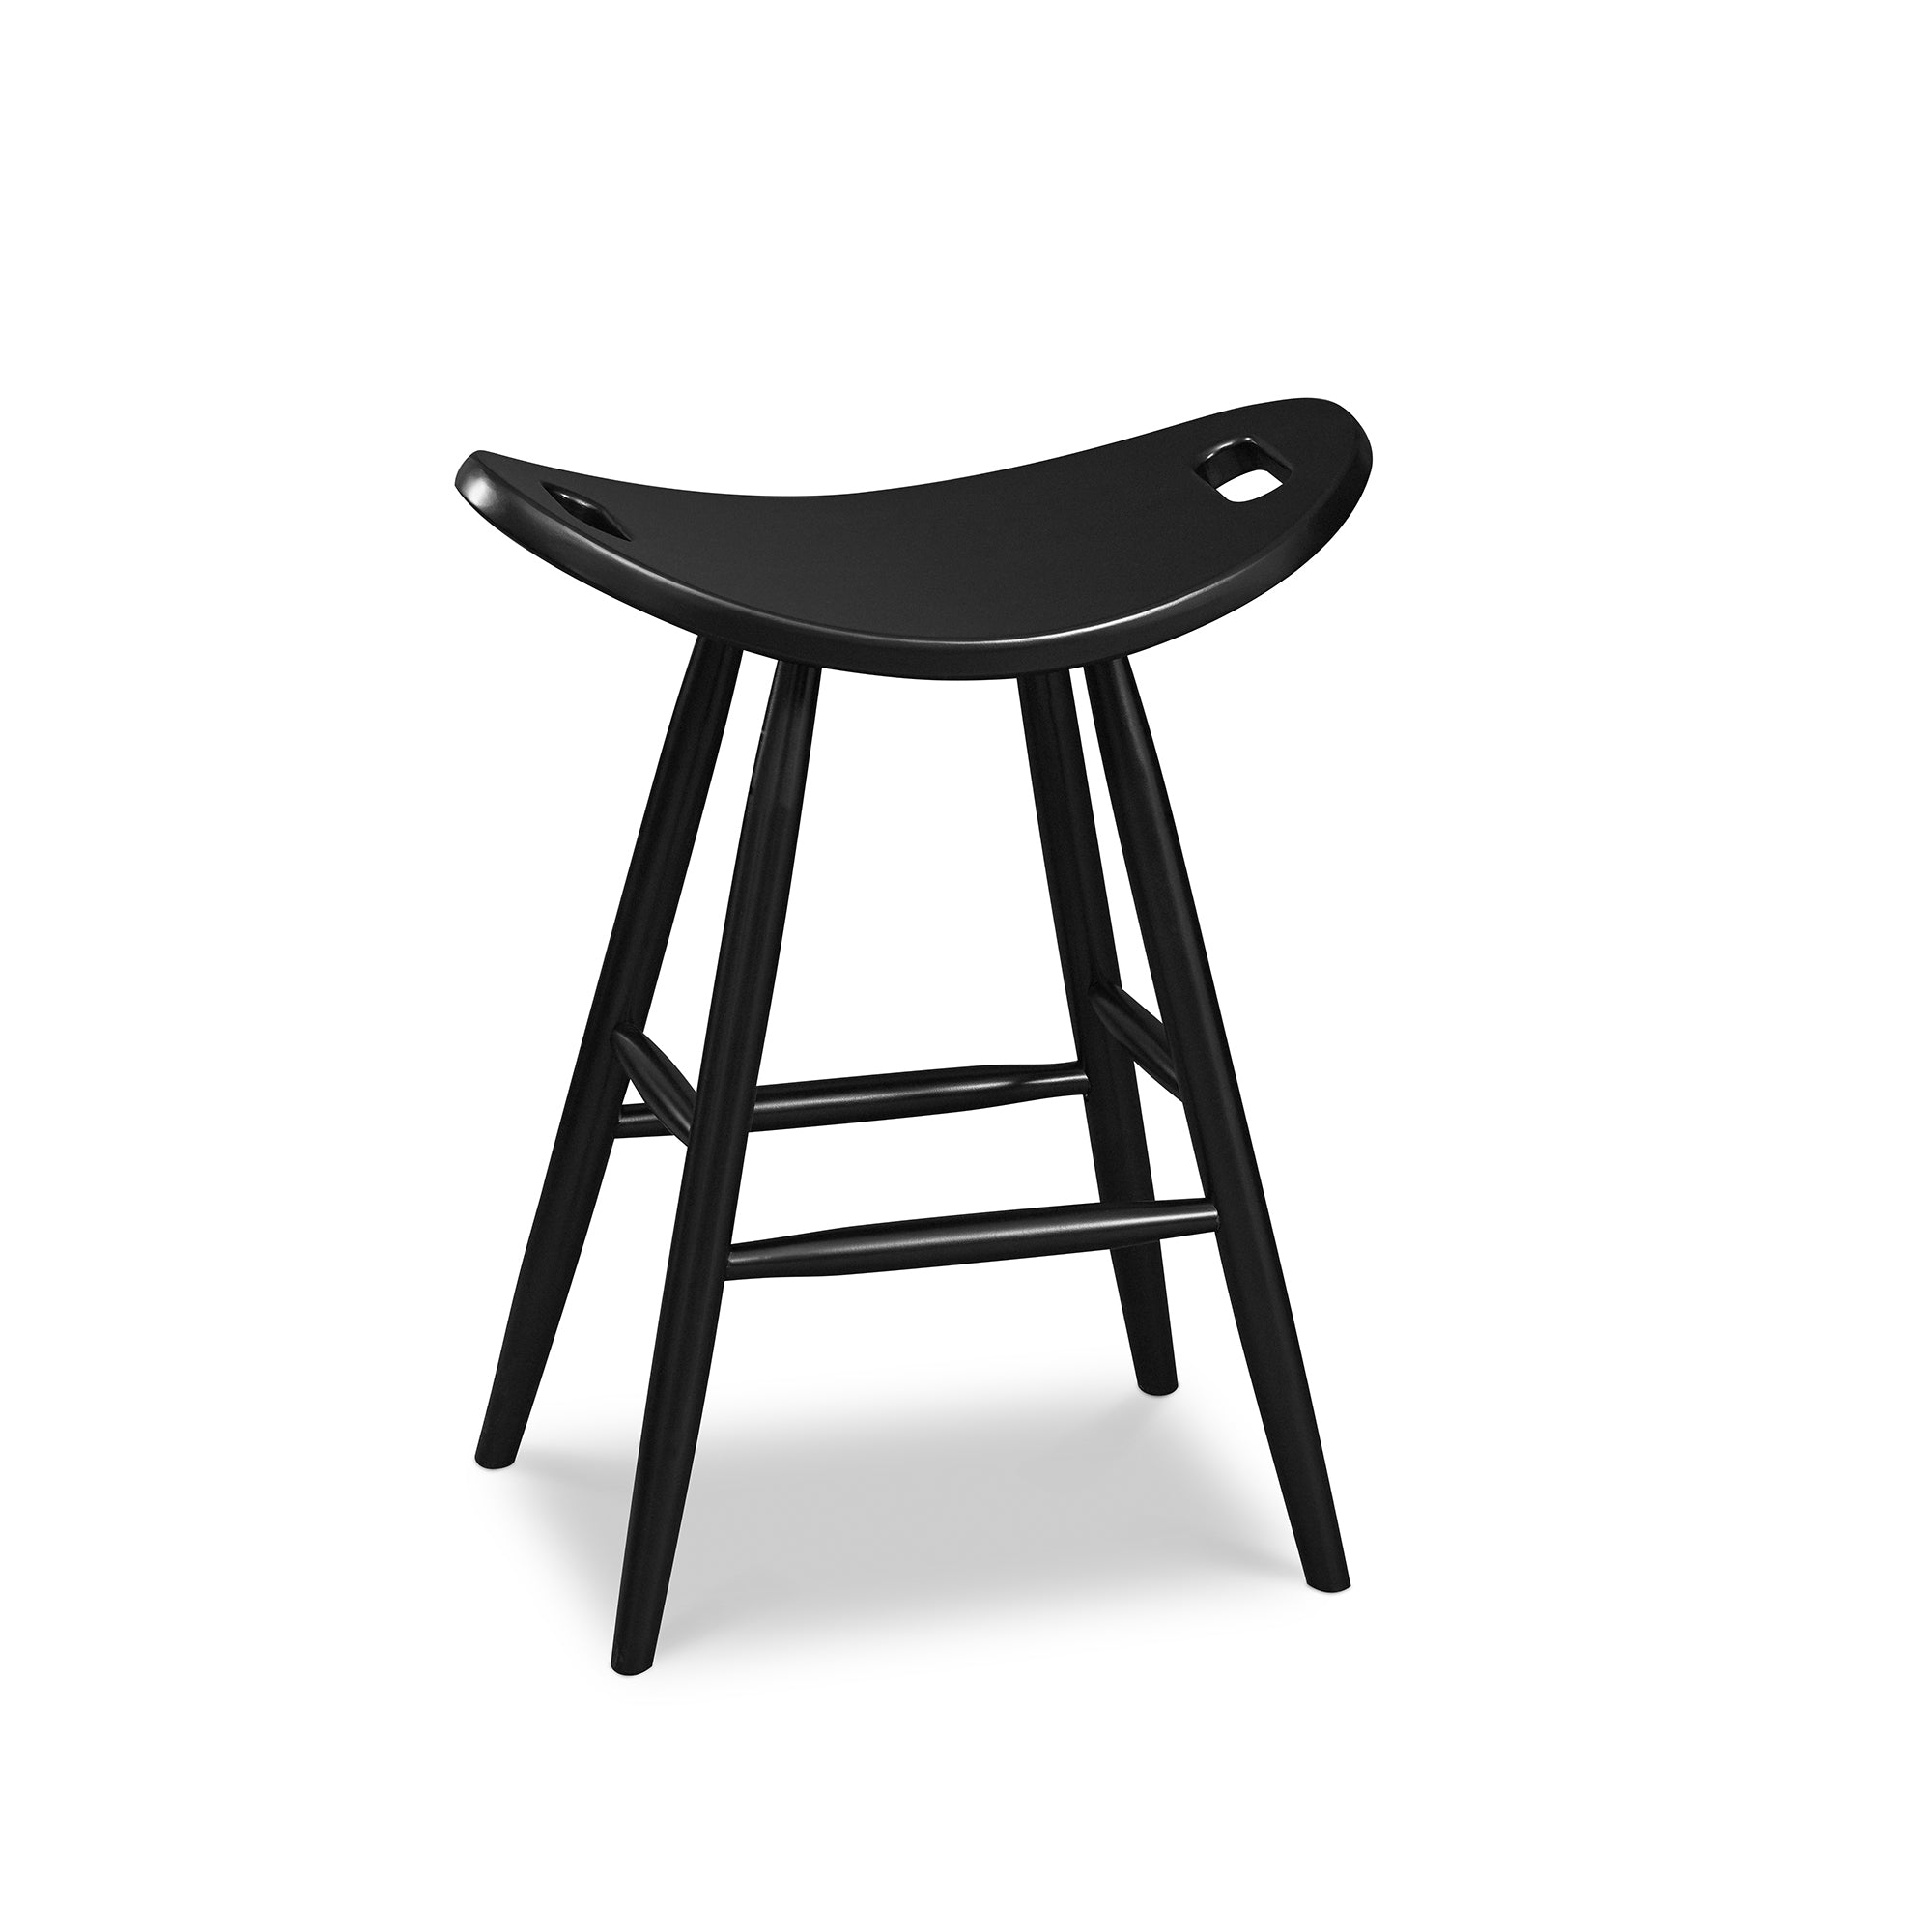 Counter height painted black saddle seat stool